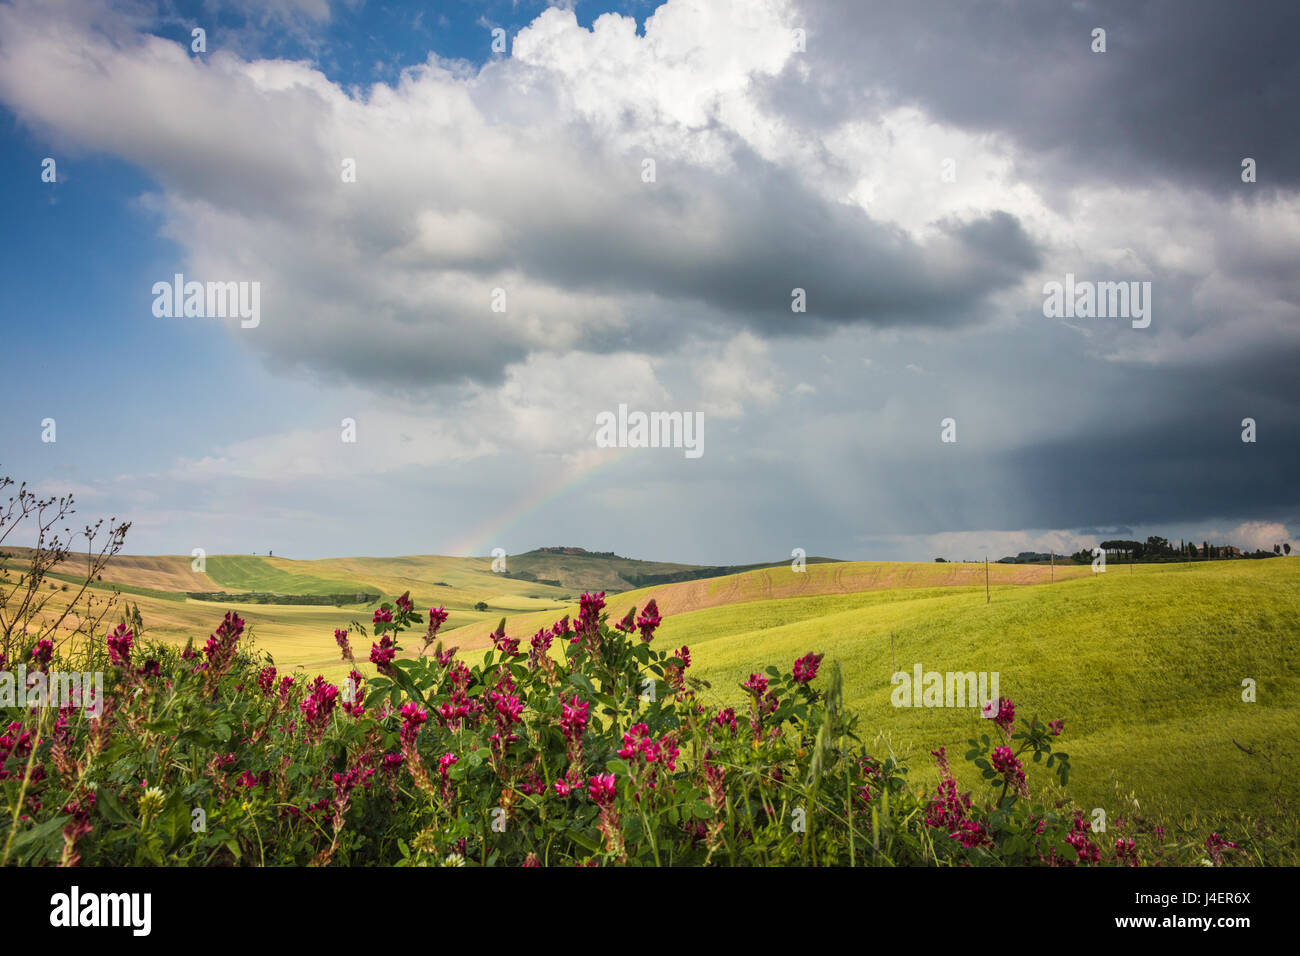 Red flowers and rainbow frame the green hills and farmland of Crete Senesi (Senese Clays), Province of Siena, Tuscany, Italy Stock Photo